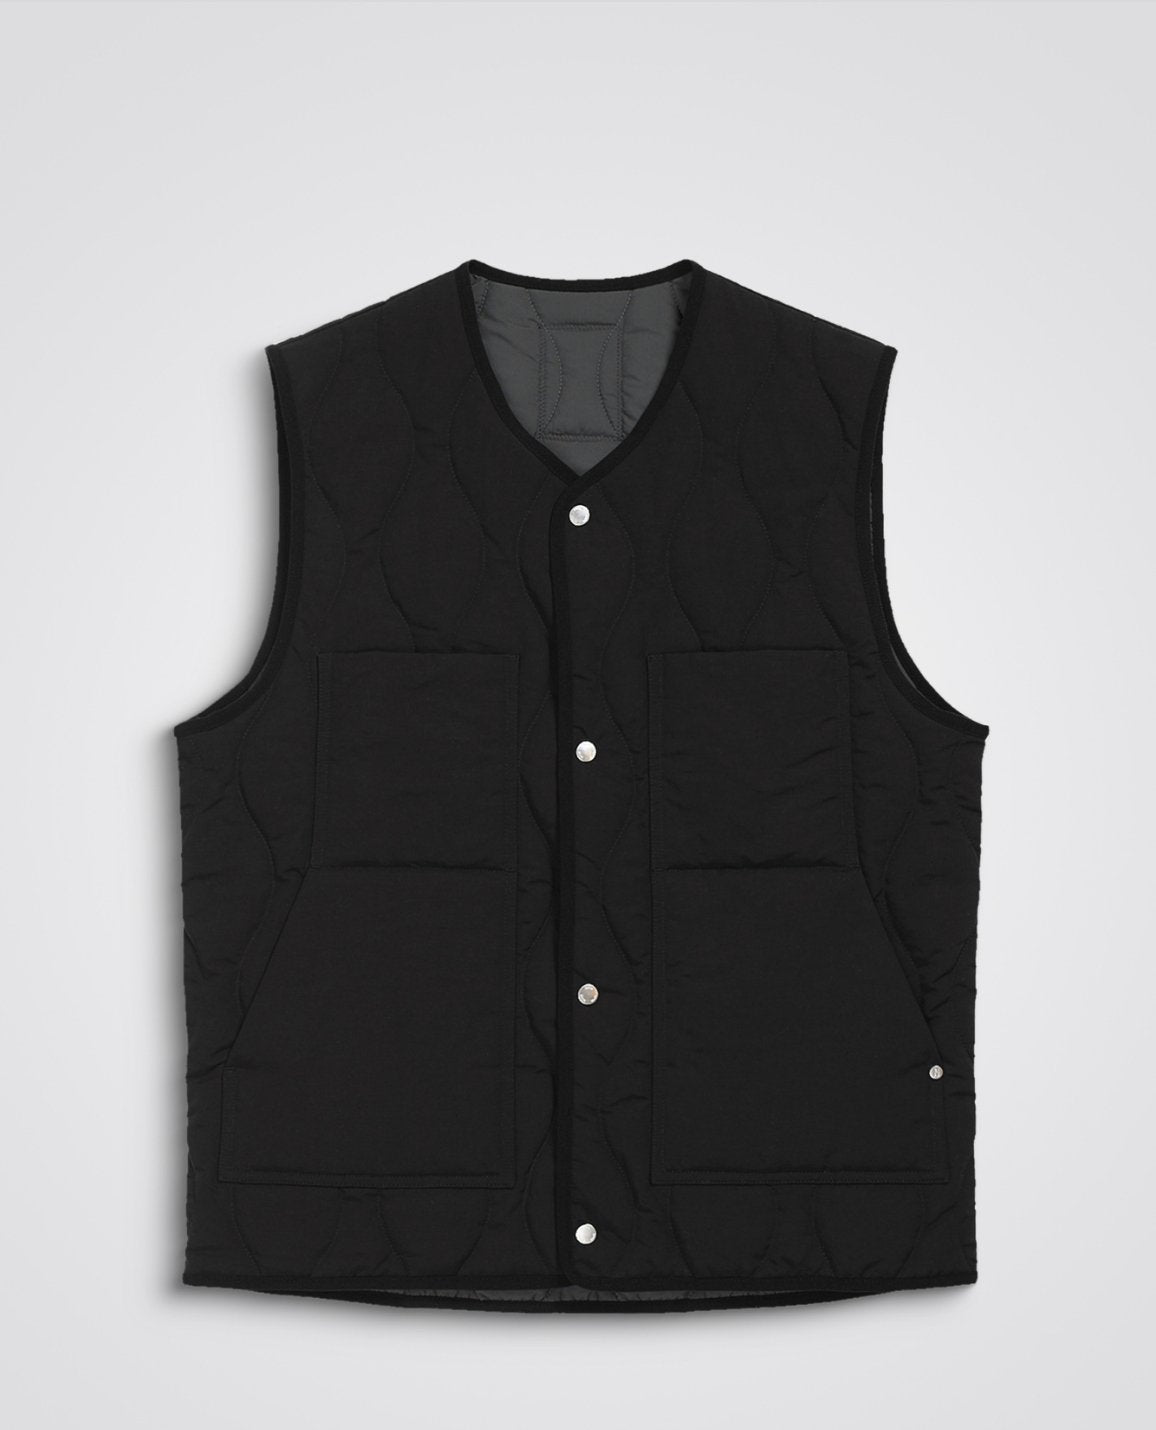 Peter Waxed Nylon Insulated Vest - Norse Projects - Danali - N50-0226-Black-S